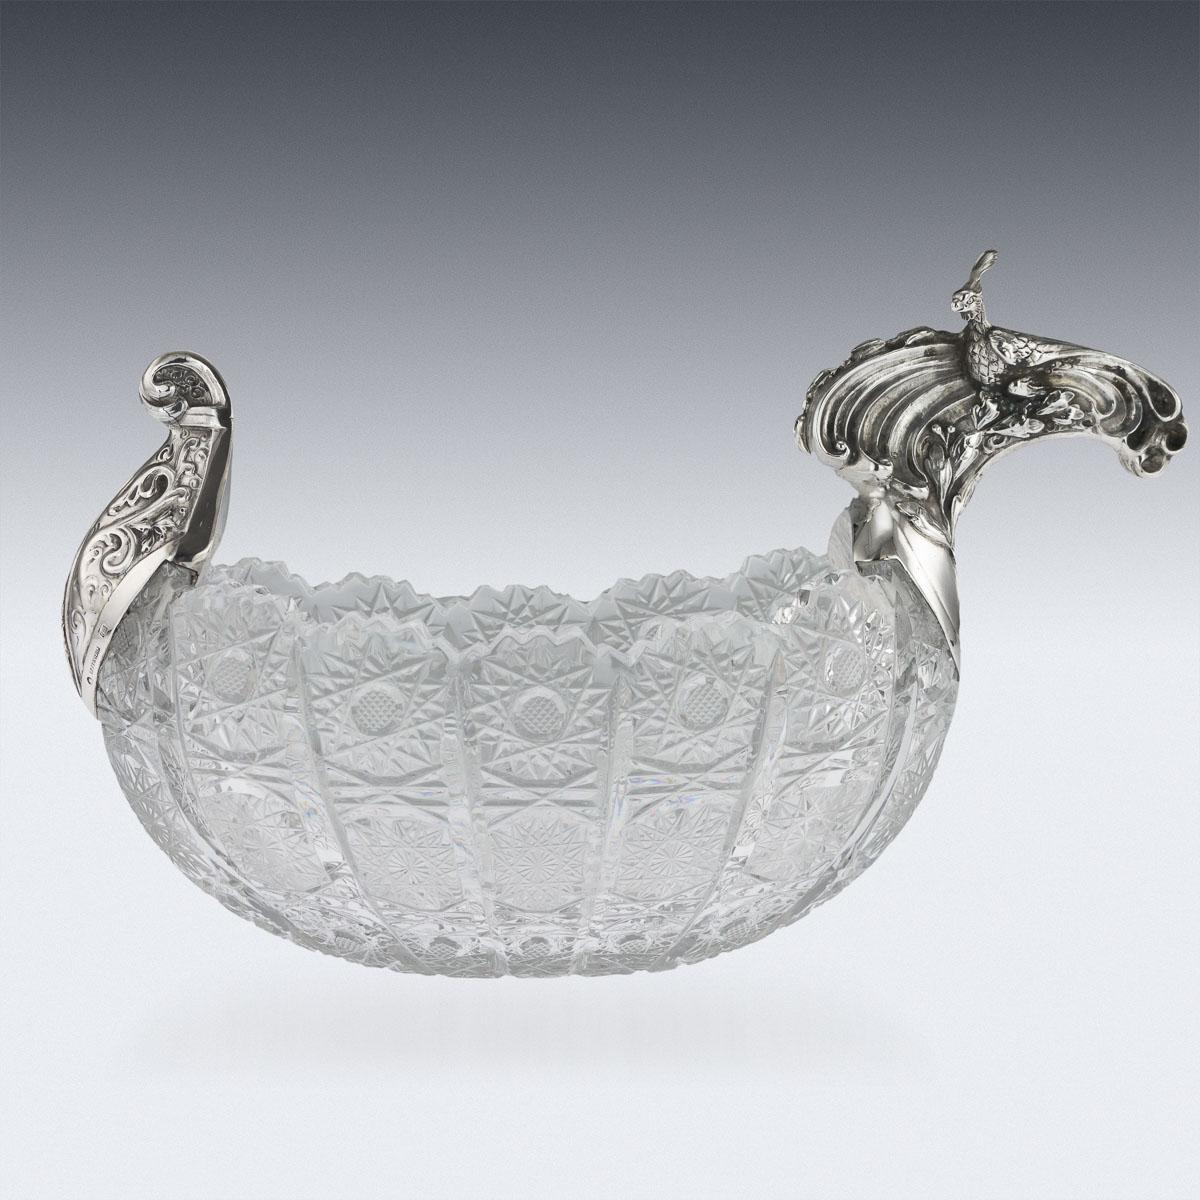 Antique early-20th century Imperial Russian solid silver & cut-glass Pan-Slavic style kovsh. with a curling mount prow, the handle cast and chased depicting a Firebird from the fable by Alexander Sergaiavich Pushkin, the body cut with a diamond and